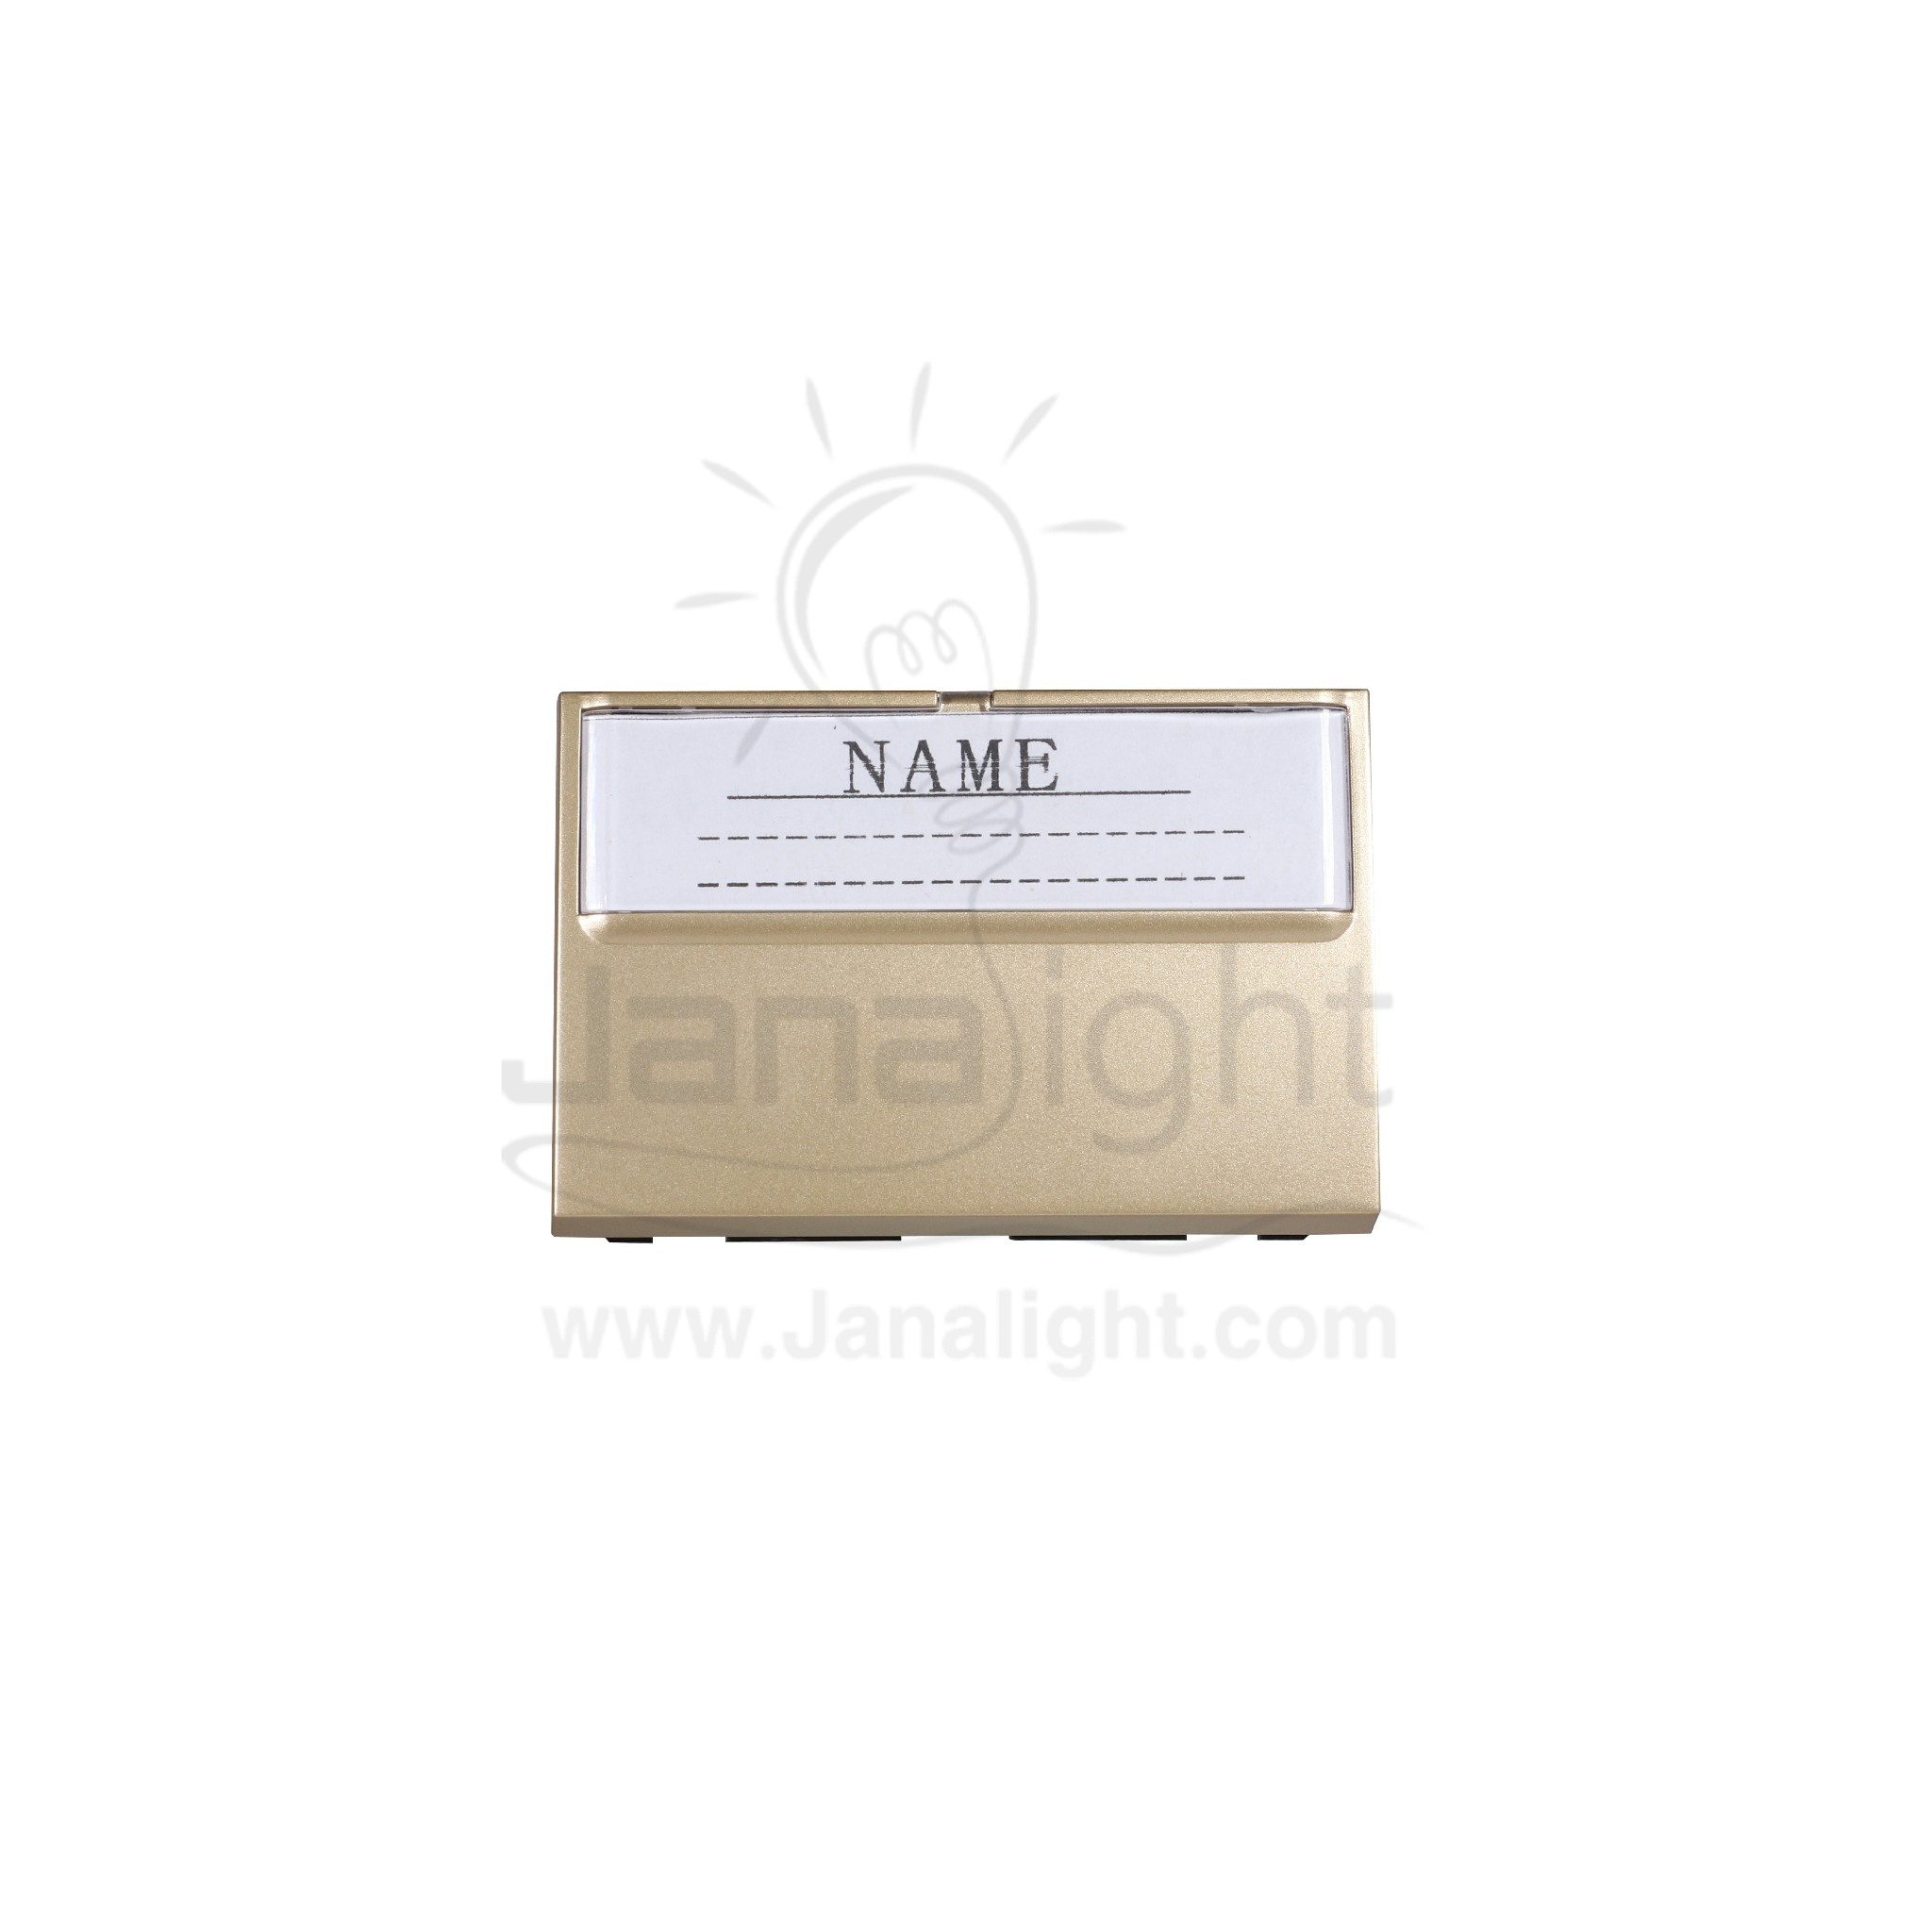 Khind led panel door bell champagne switch with name label|زر جرس عريض بضوء بكرت اسم شمباني خيند